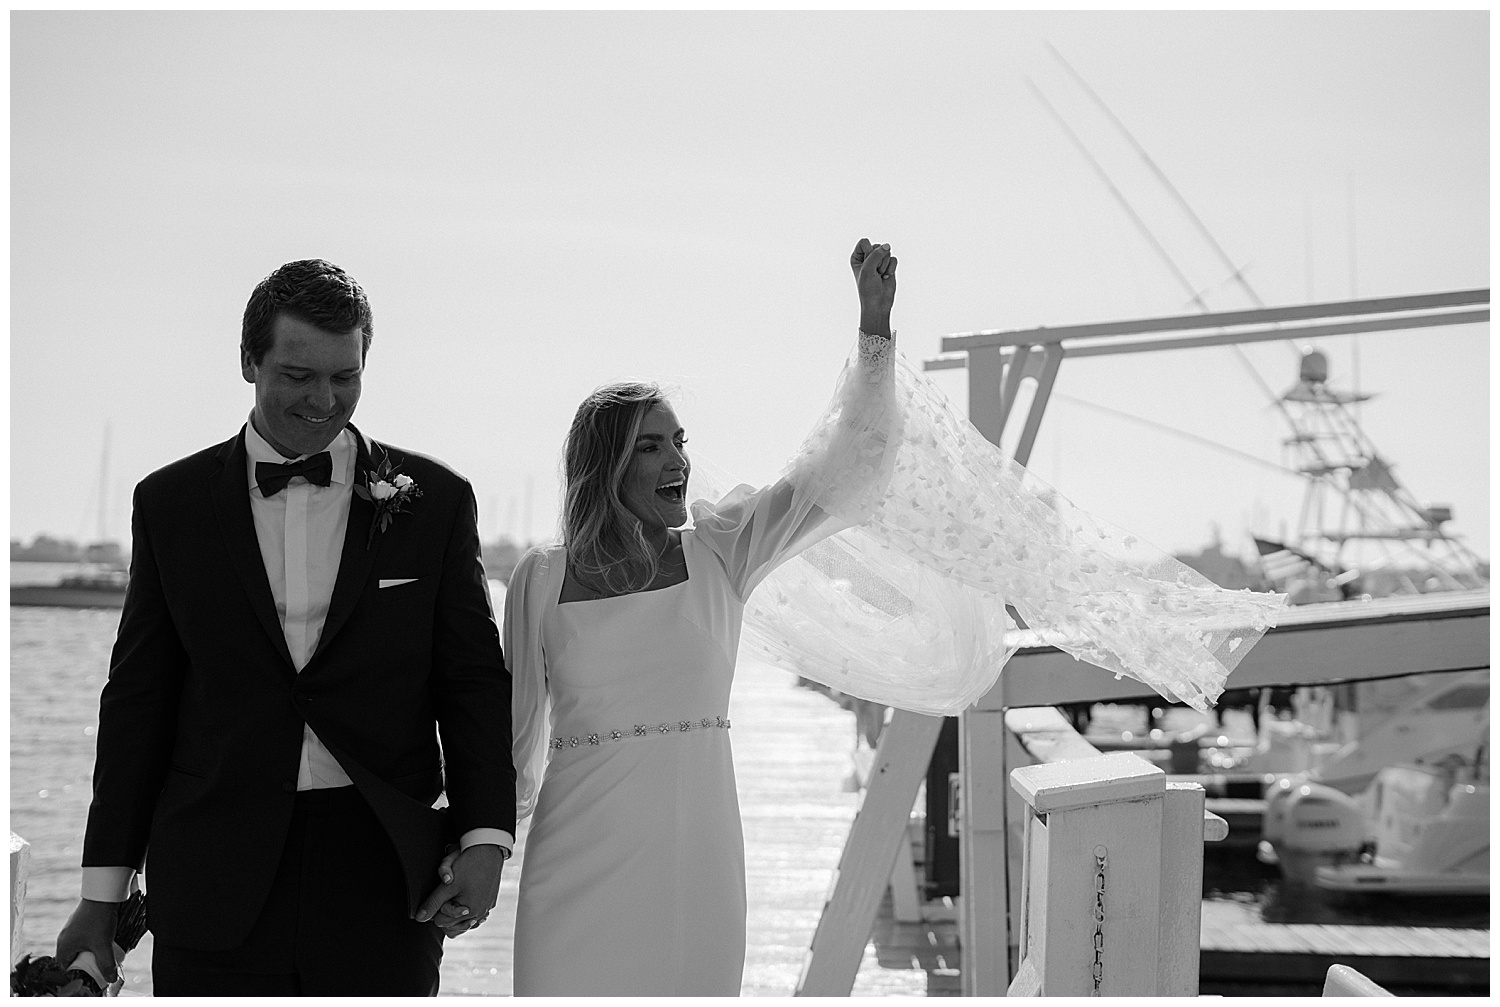 Chic Downtown Newport Wedding Photos of Bride and Groom on Bowens Wharf